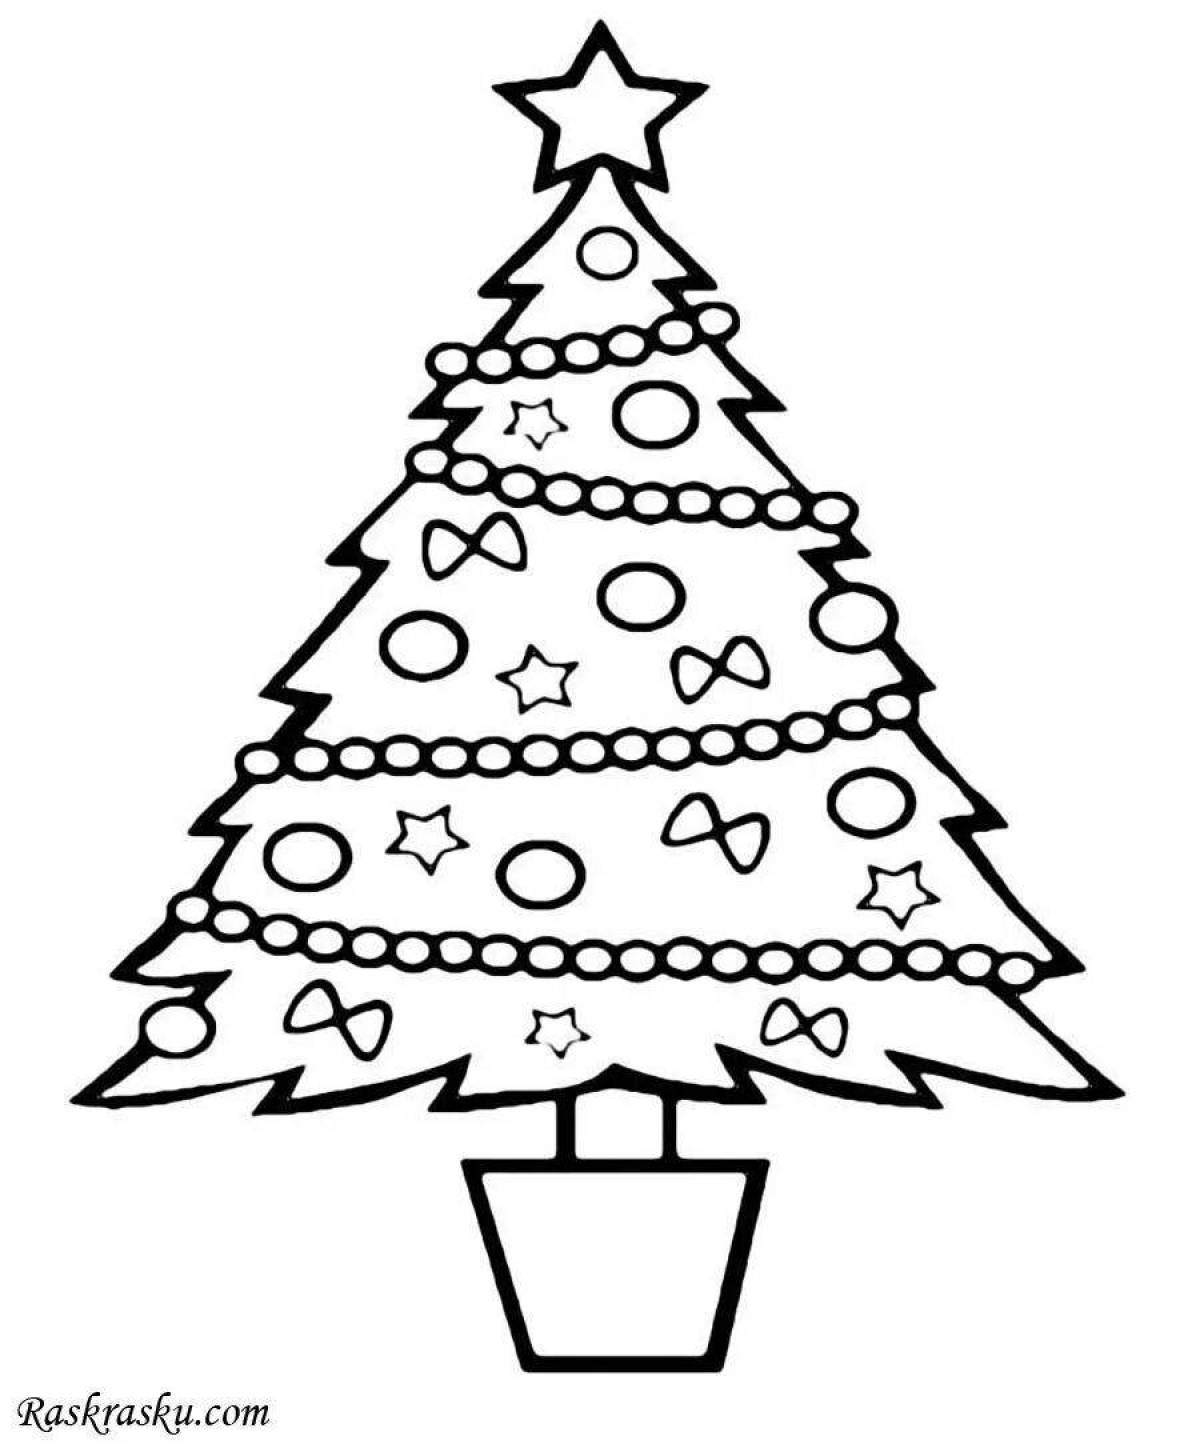 Christmas tree with balls for children